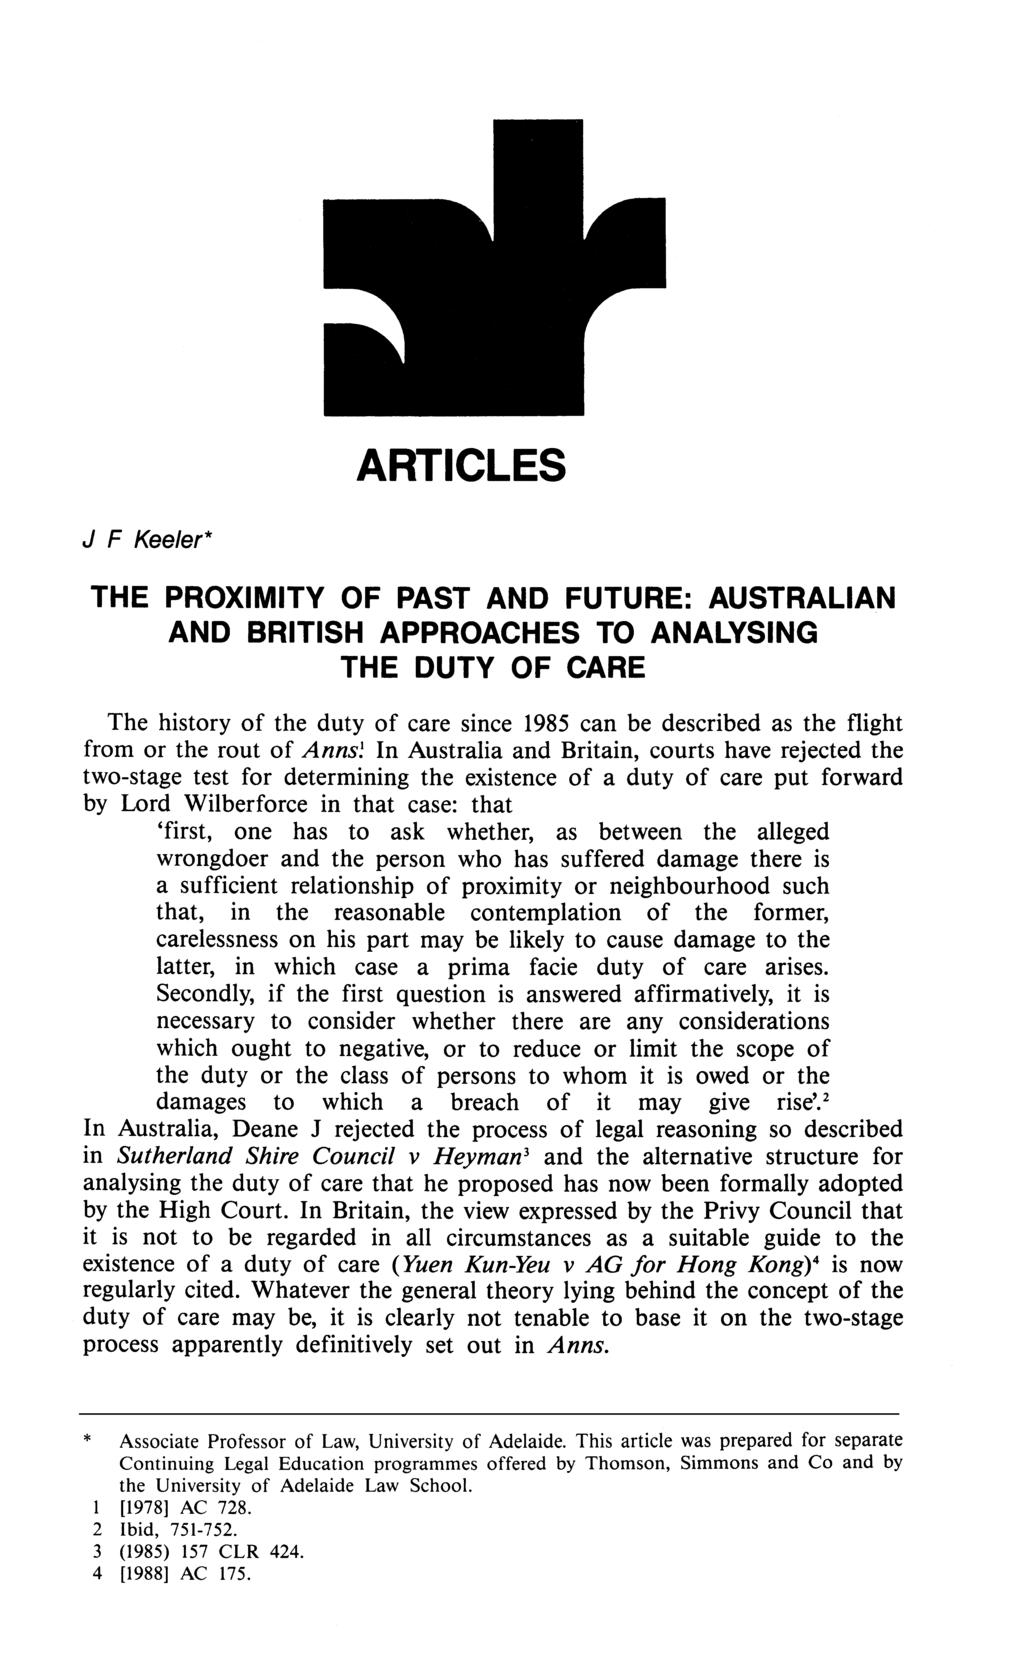 ARTICLES J F Keeler* THE PROXIMITY OF PAST AND FUTURE: AUSTRALIAN AND BRITISH APPROACHES TO ANALYSING THE DUTY OF CARE The history of the duty of care since 1985 can be described as the flight from